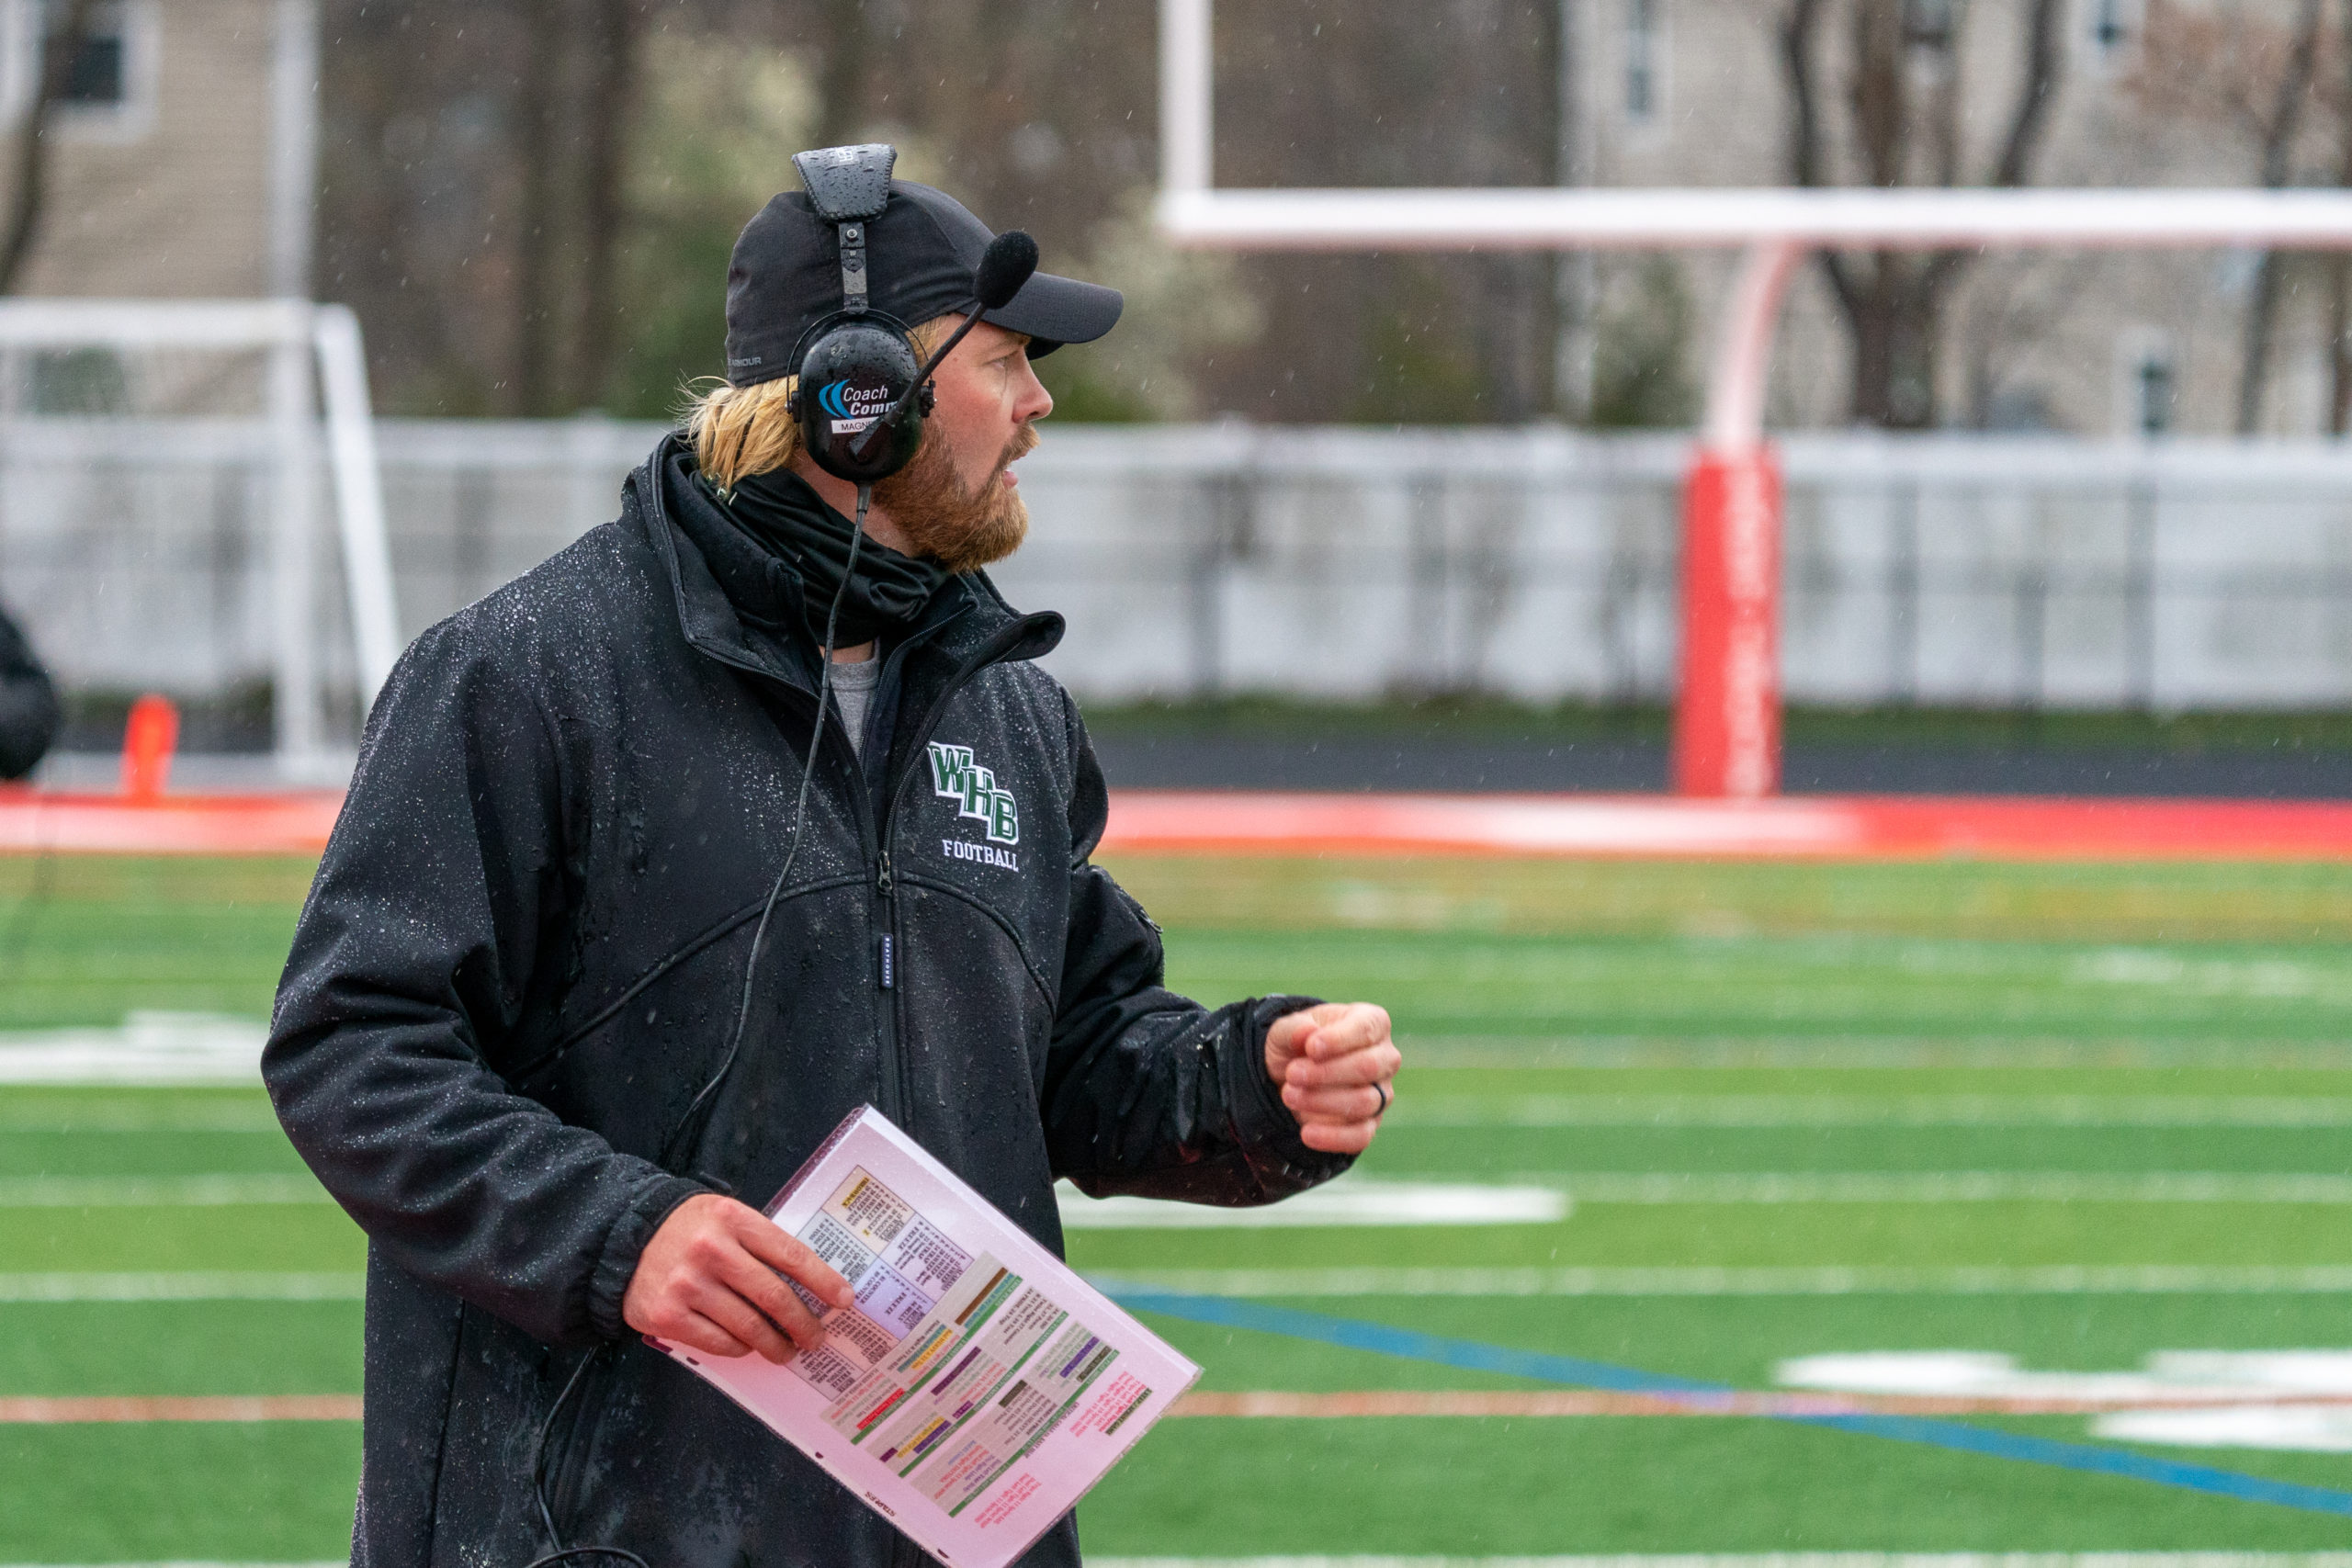 Westhampton Beach assistant coach Cole Magner is pumped up after a big play.